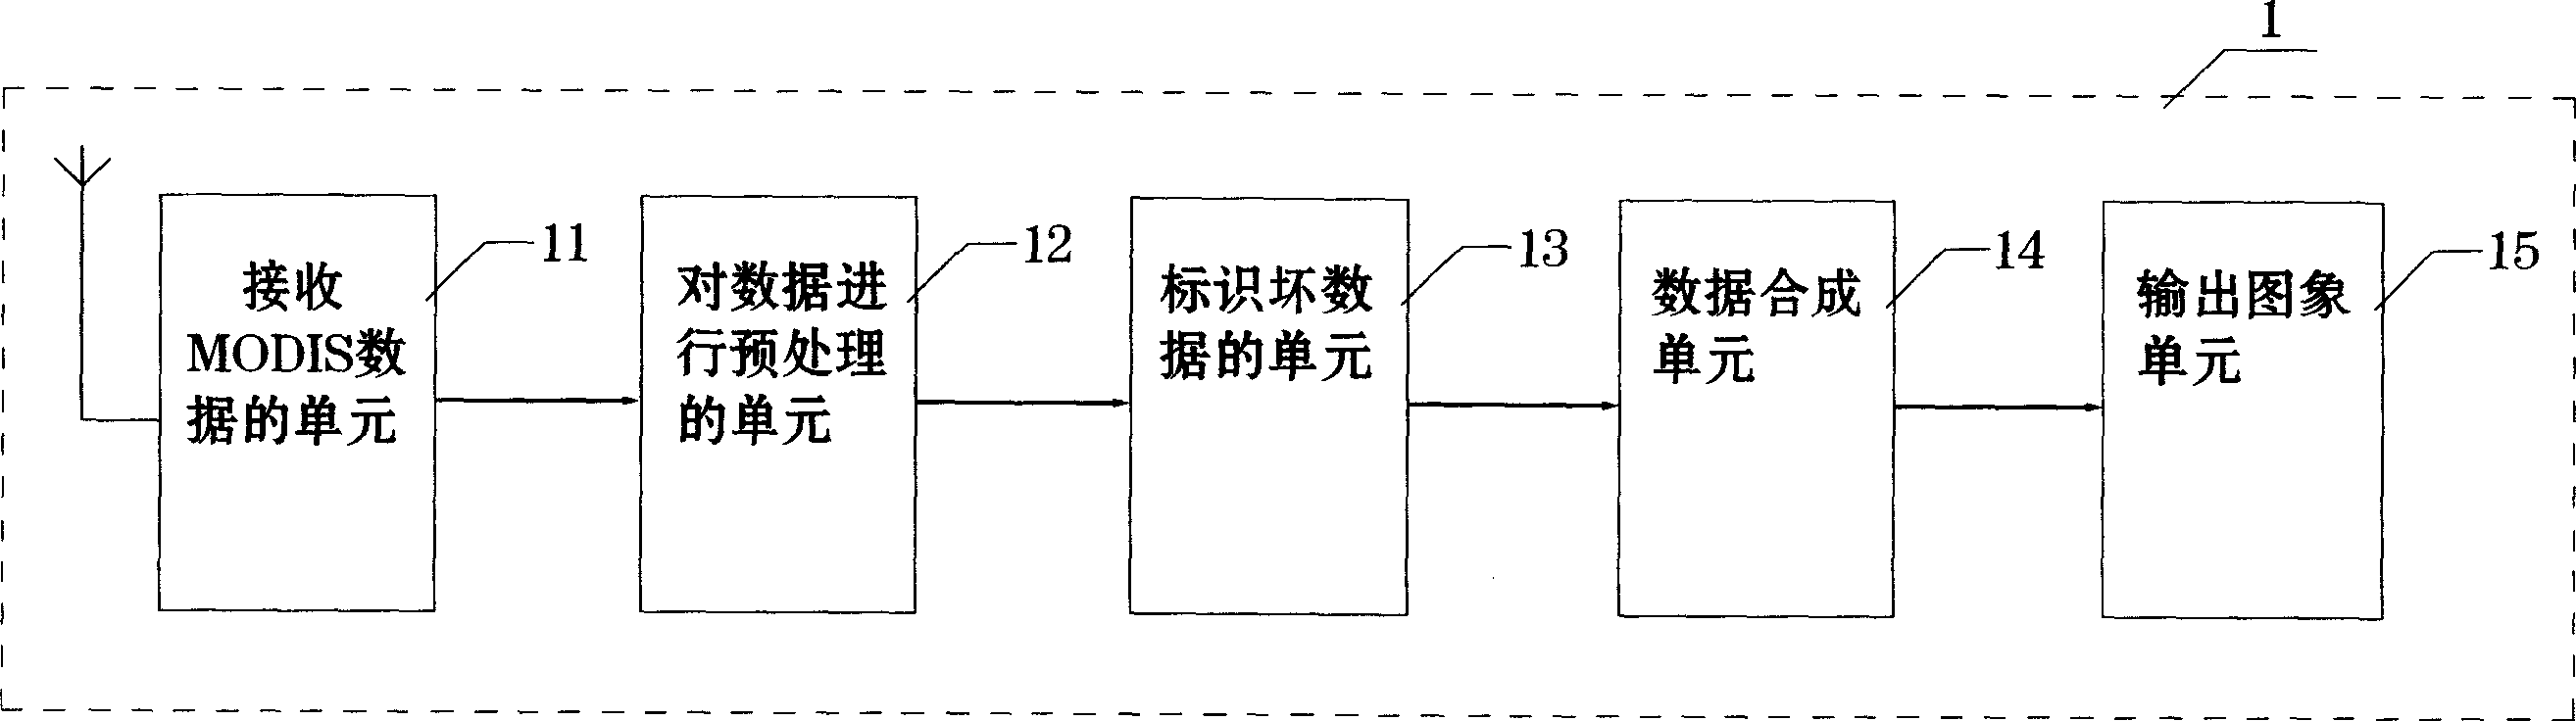 MODIS time sequence data synthesis method for extracting burn scar area and apparatus therefor